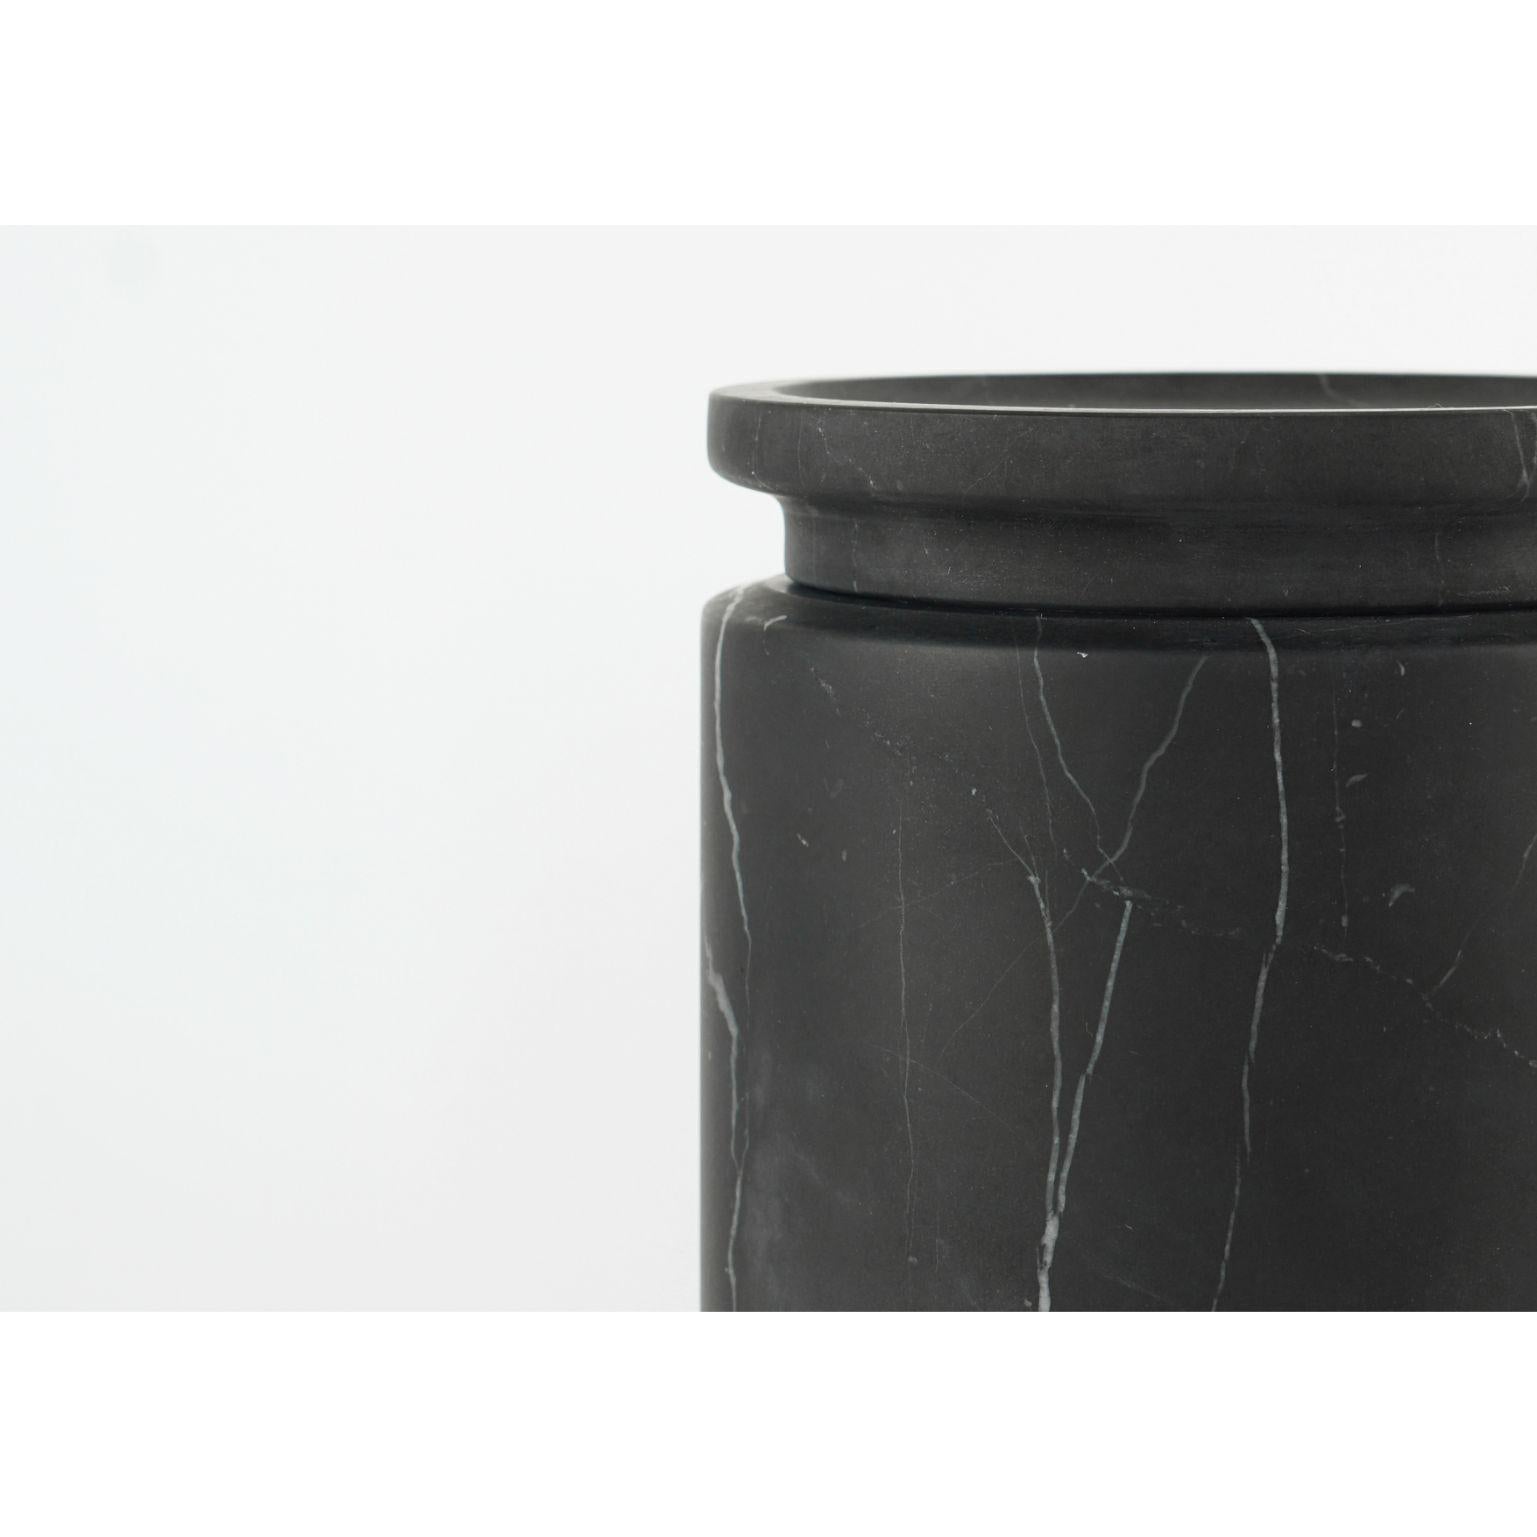 Pyxis - medium pot - black by Ivan Colominas
Pyxis Collection
Dimensions: 12.6 x 14.5 cm
Materials: Nero marquinia

Also available: Bianco michelangelo, small & large

A refined collection articulated through cylinders that vary only in size